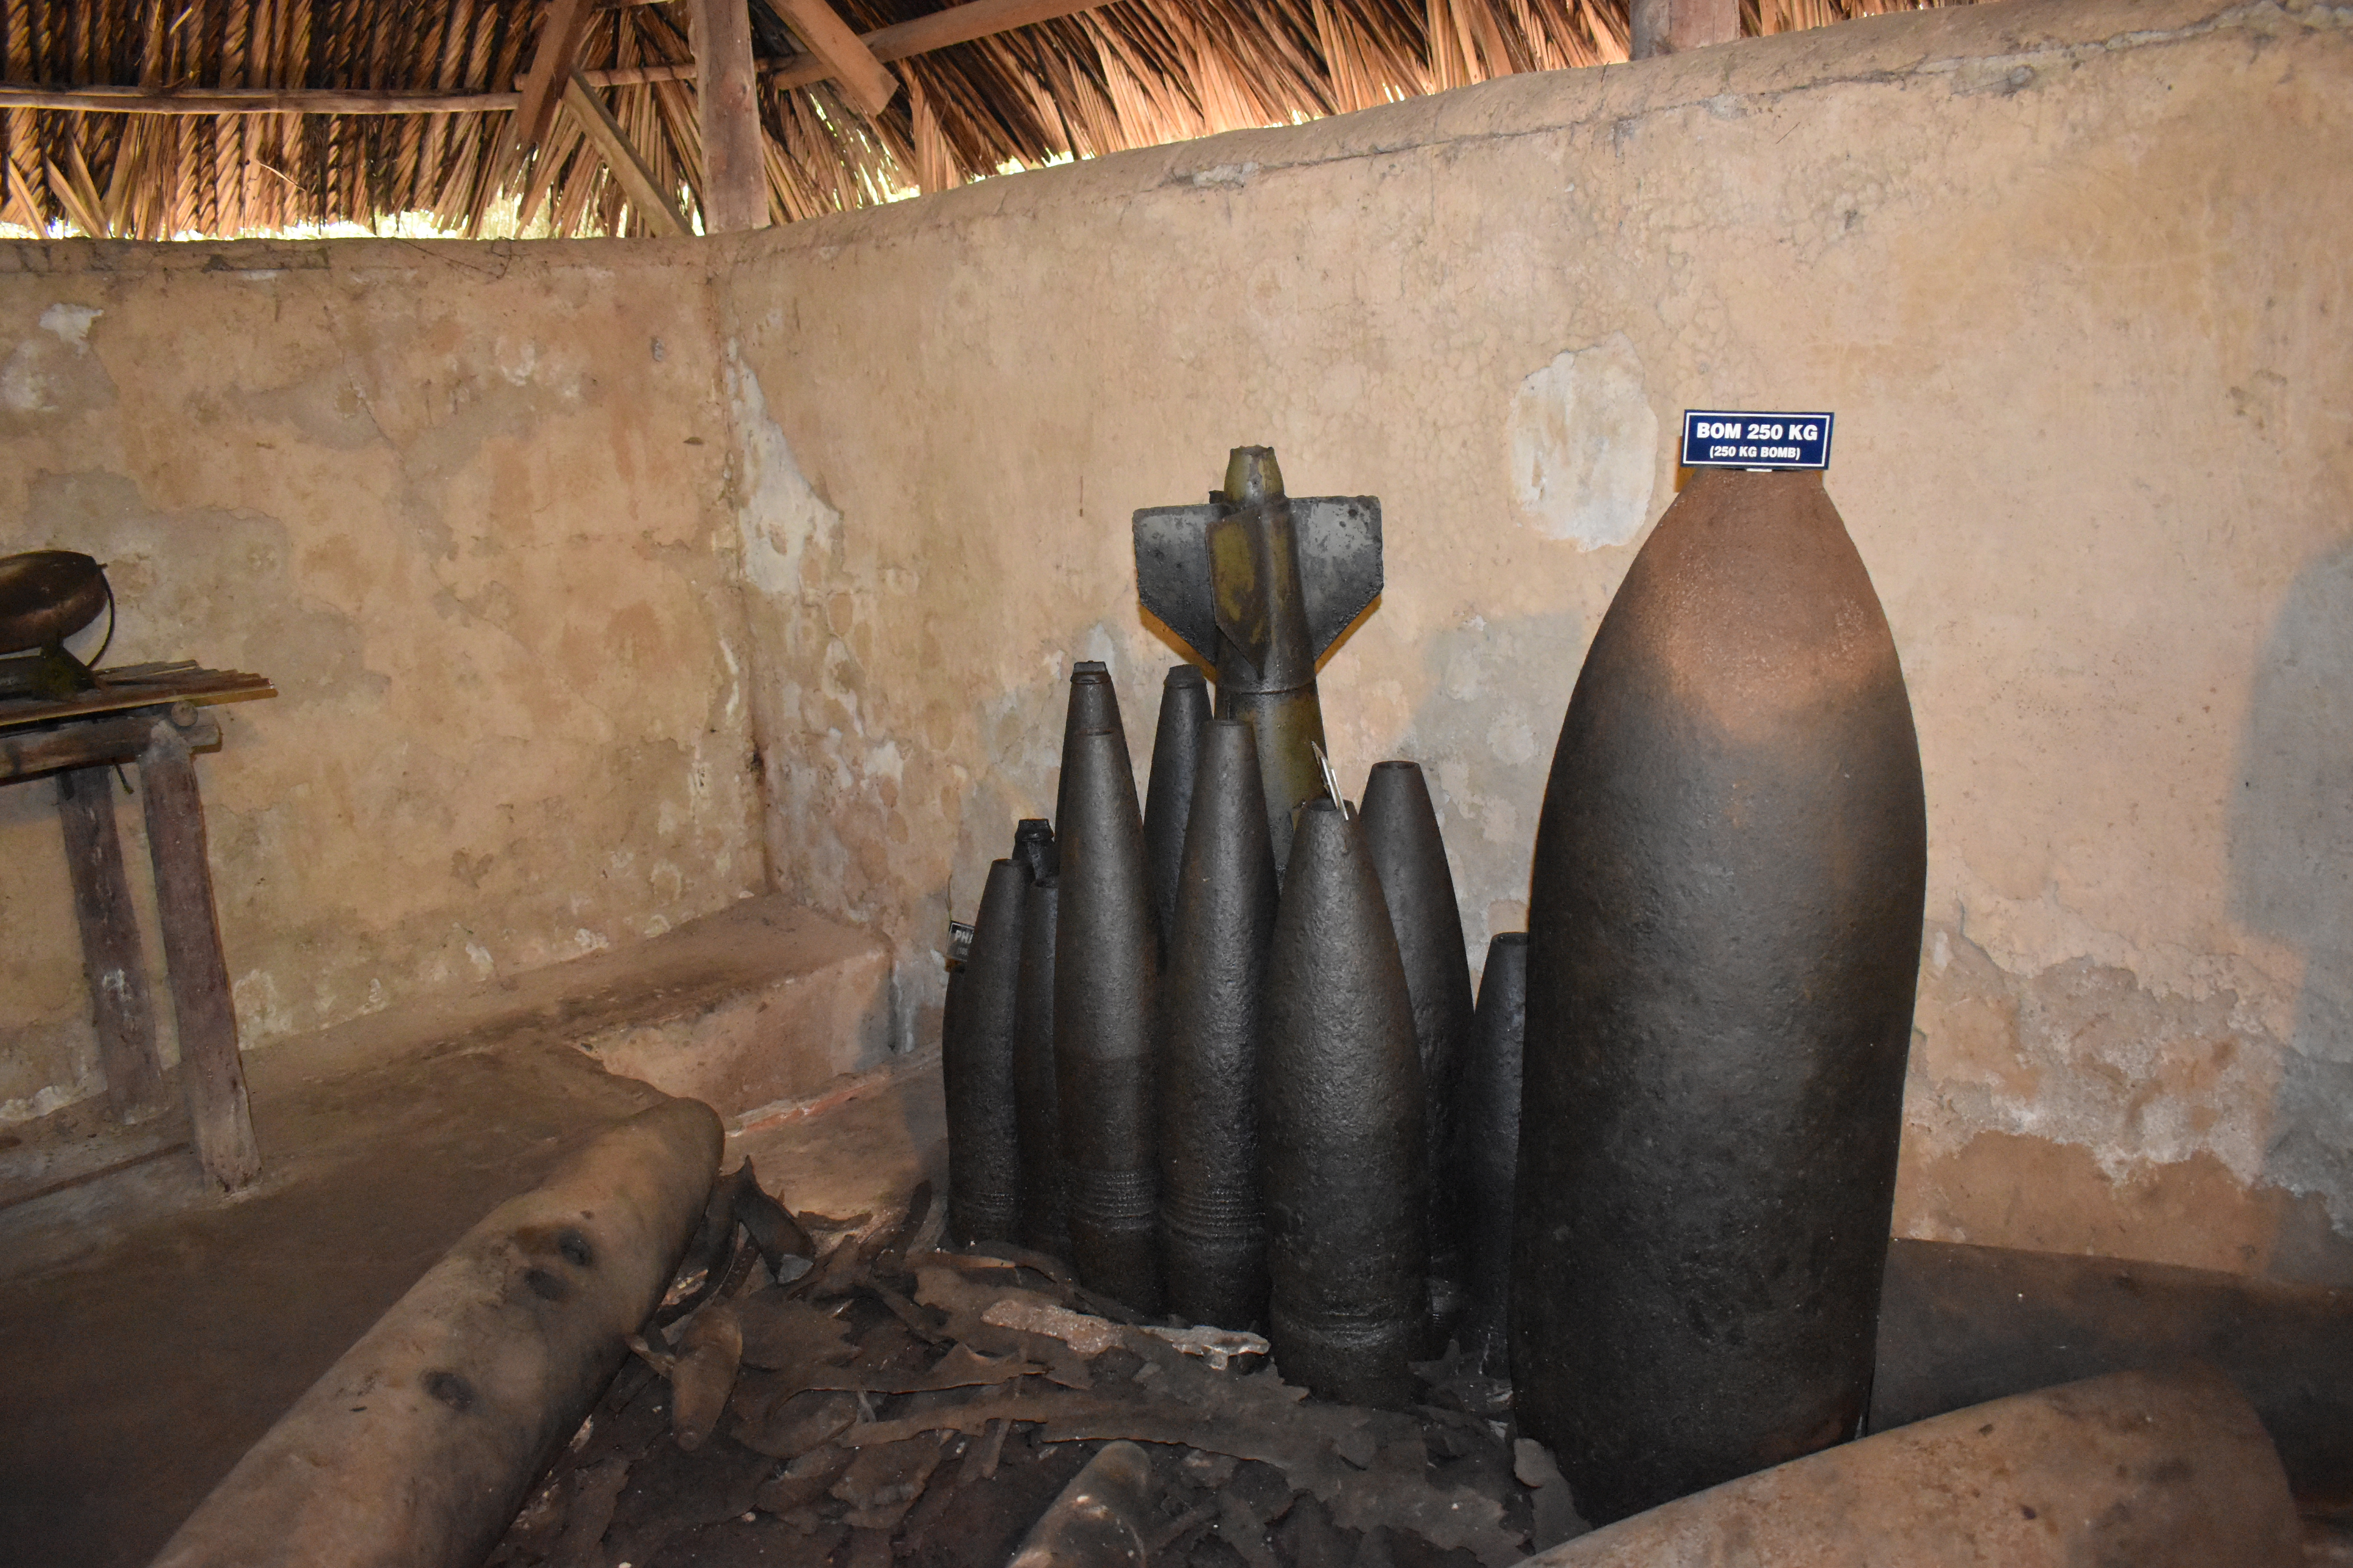 Bombs from Vietnam War at Vietcong tunnel systems in Cu Chi (Thinkstock/PA)